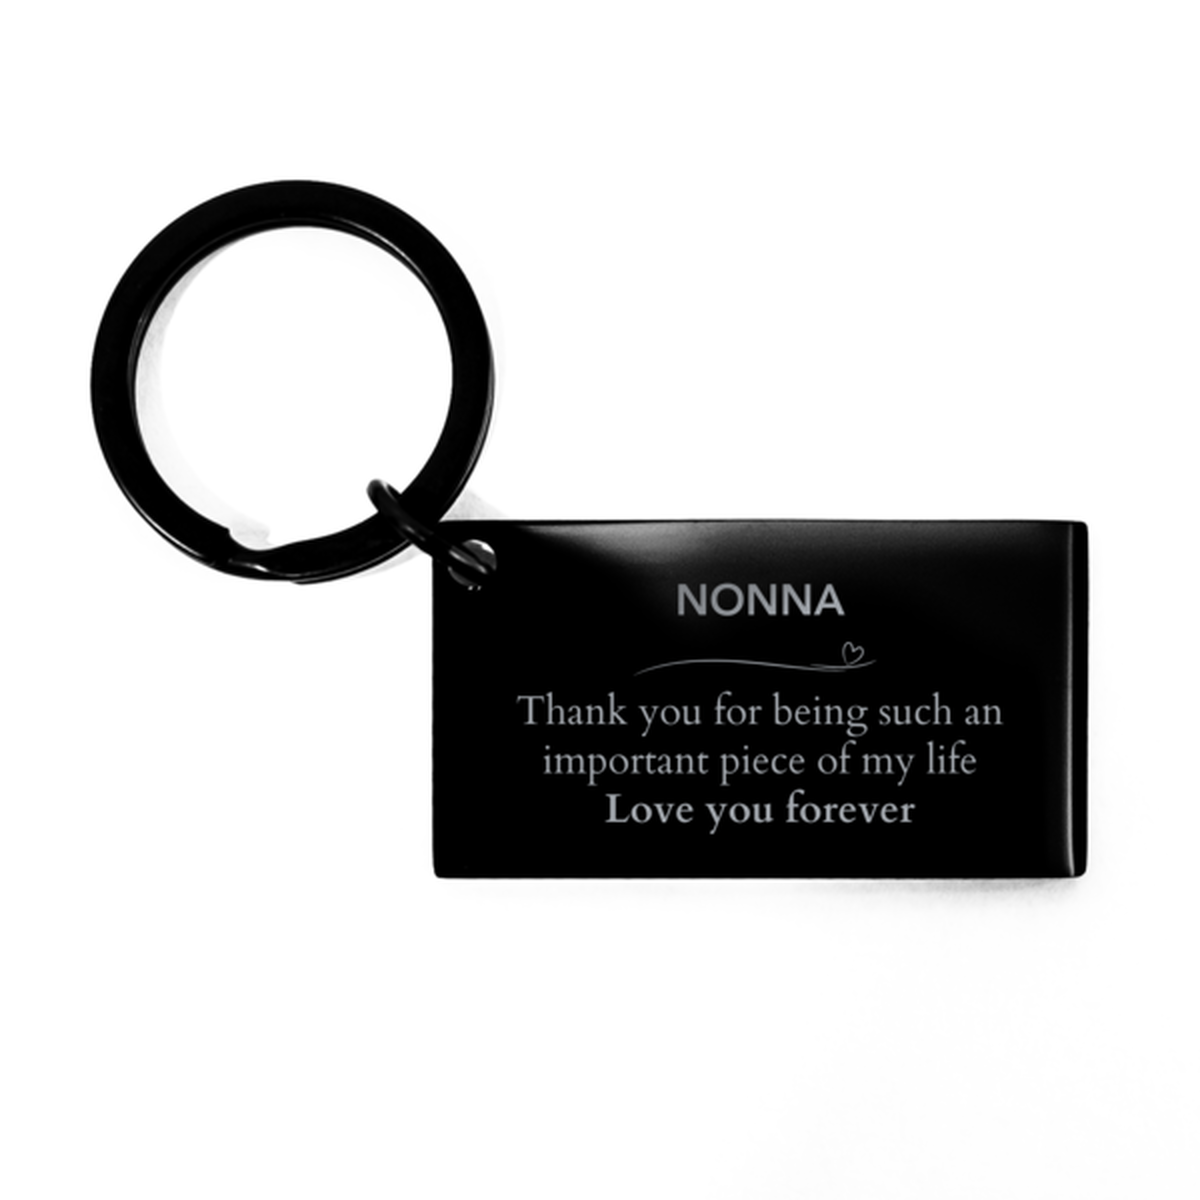 Appropriate Nonna Keychain Epic Birthday Gifts for Nonna Thank you for being such an important piece of my life Nonna Christmas Mothers Fathers Day